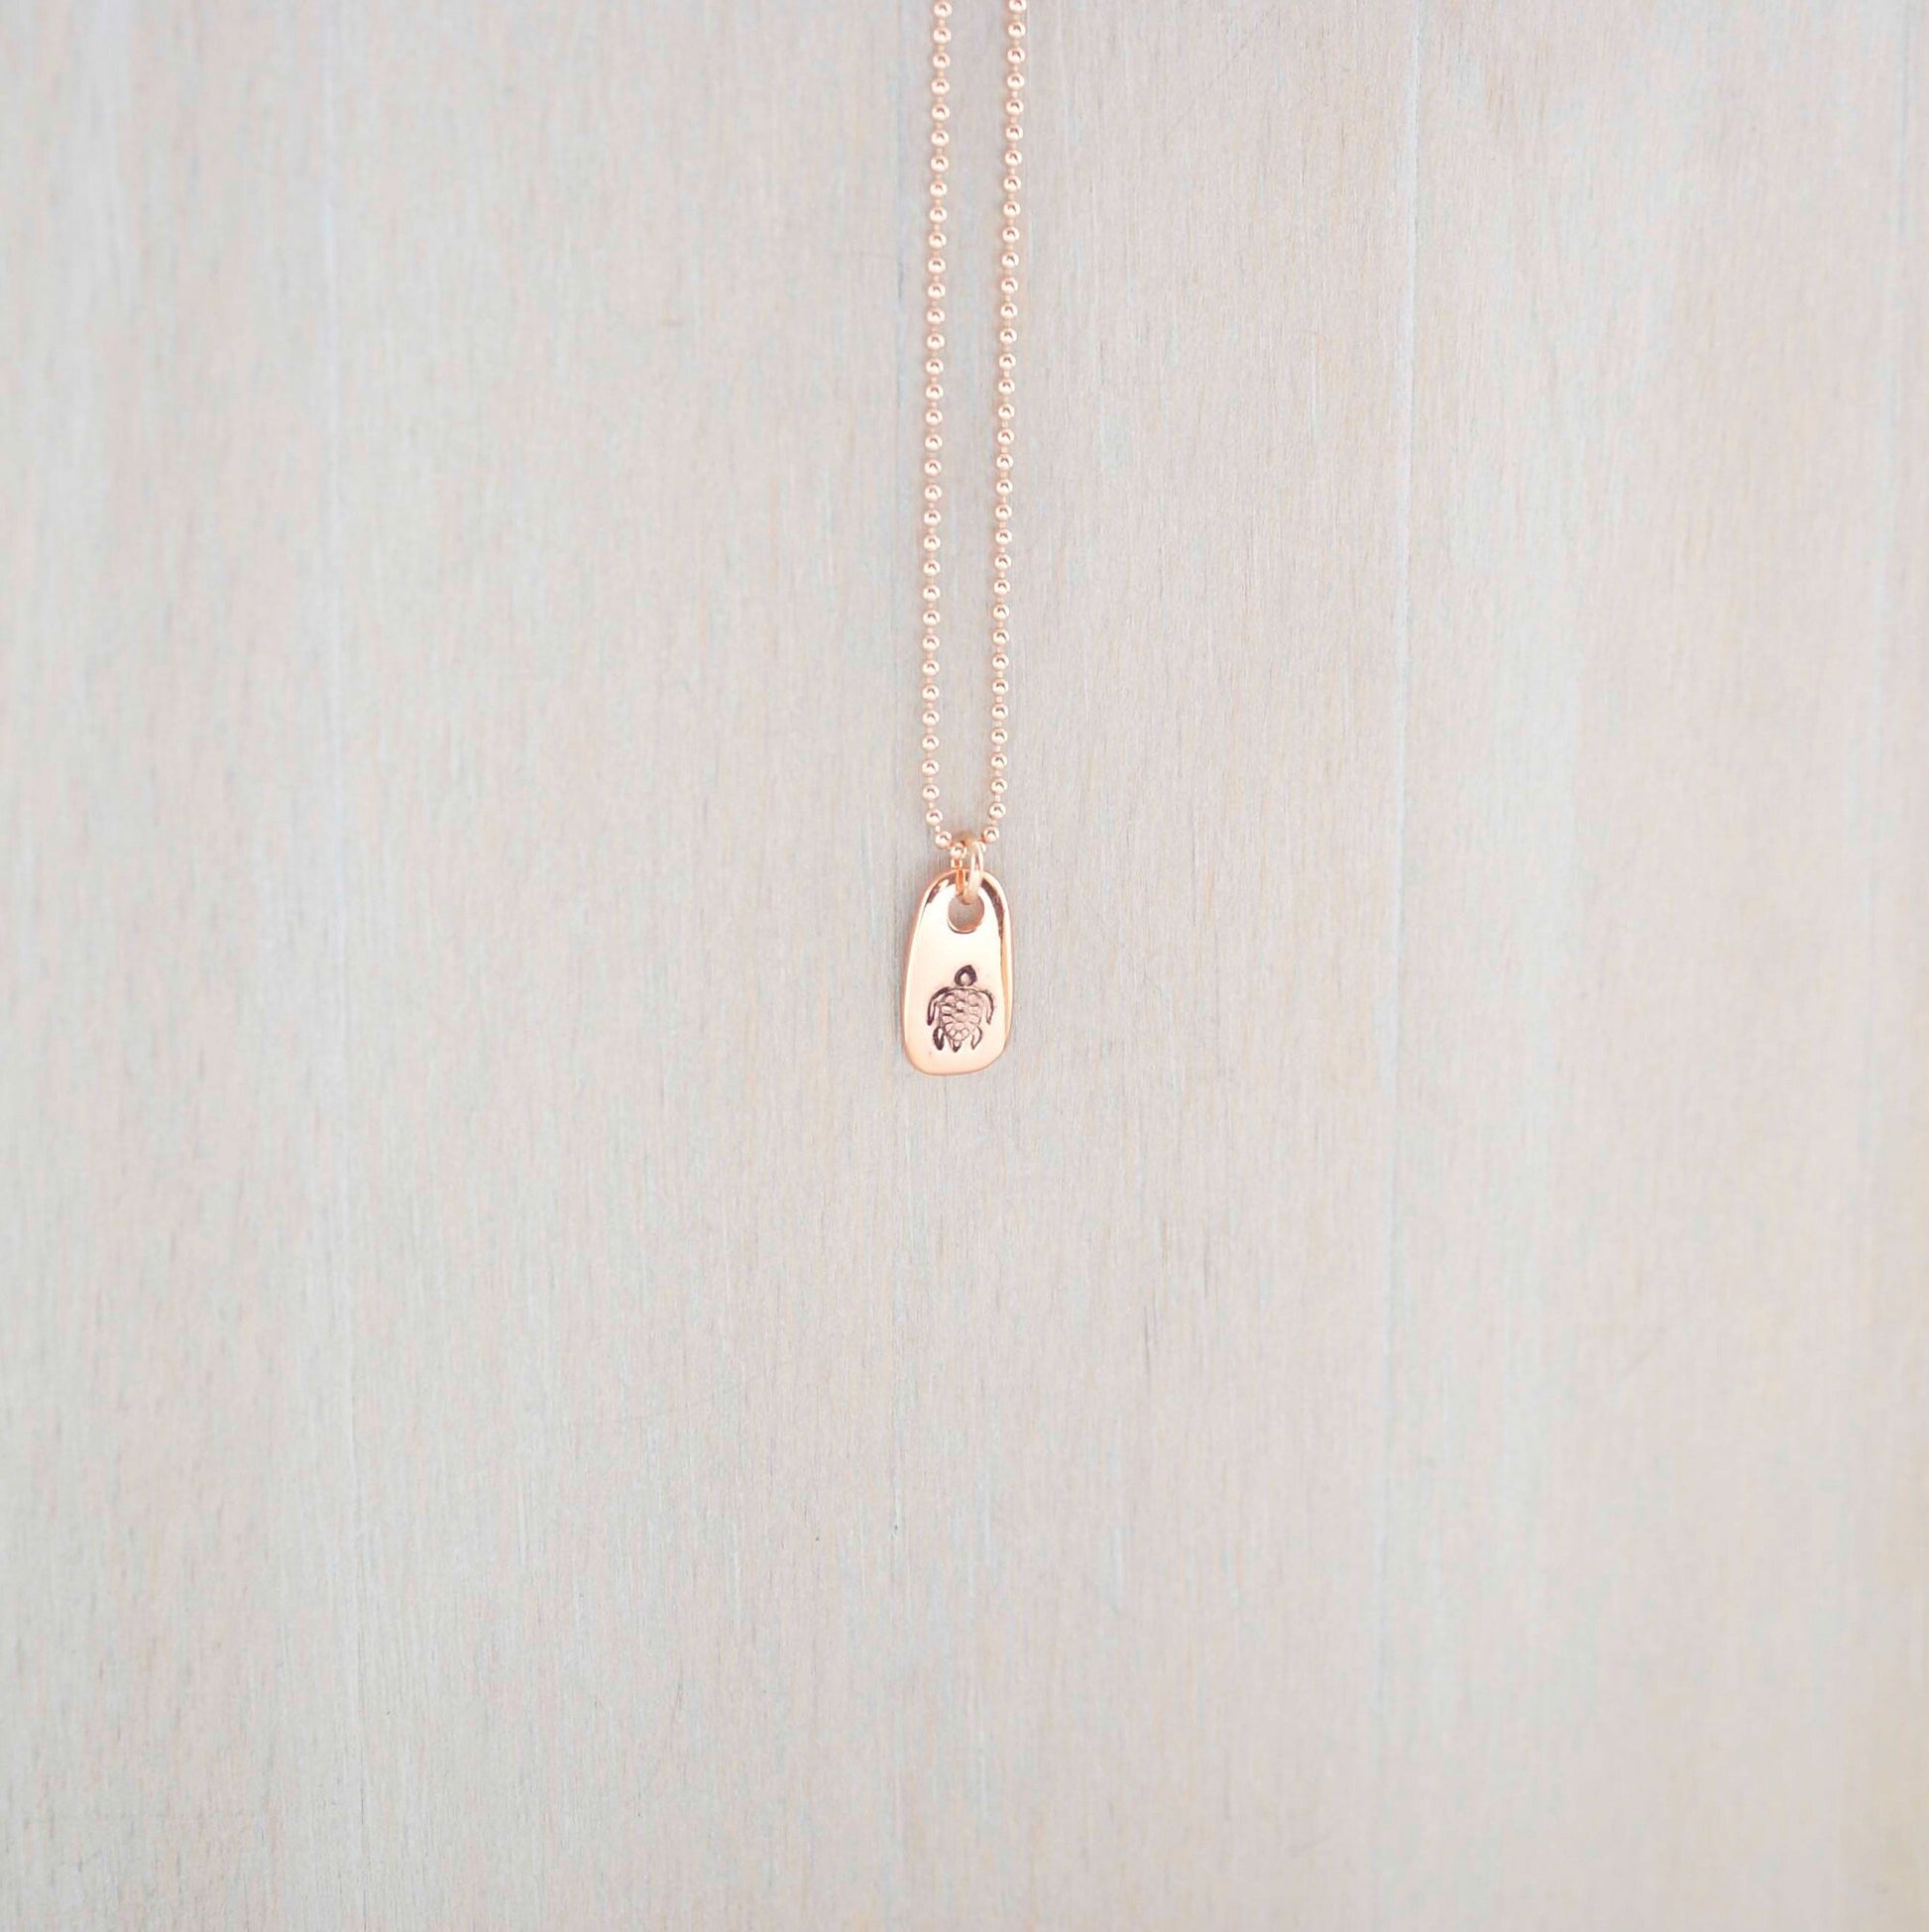 Rose gold necklace stamped with a turtle